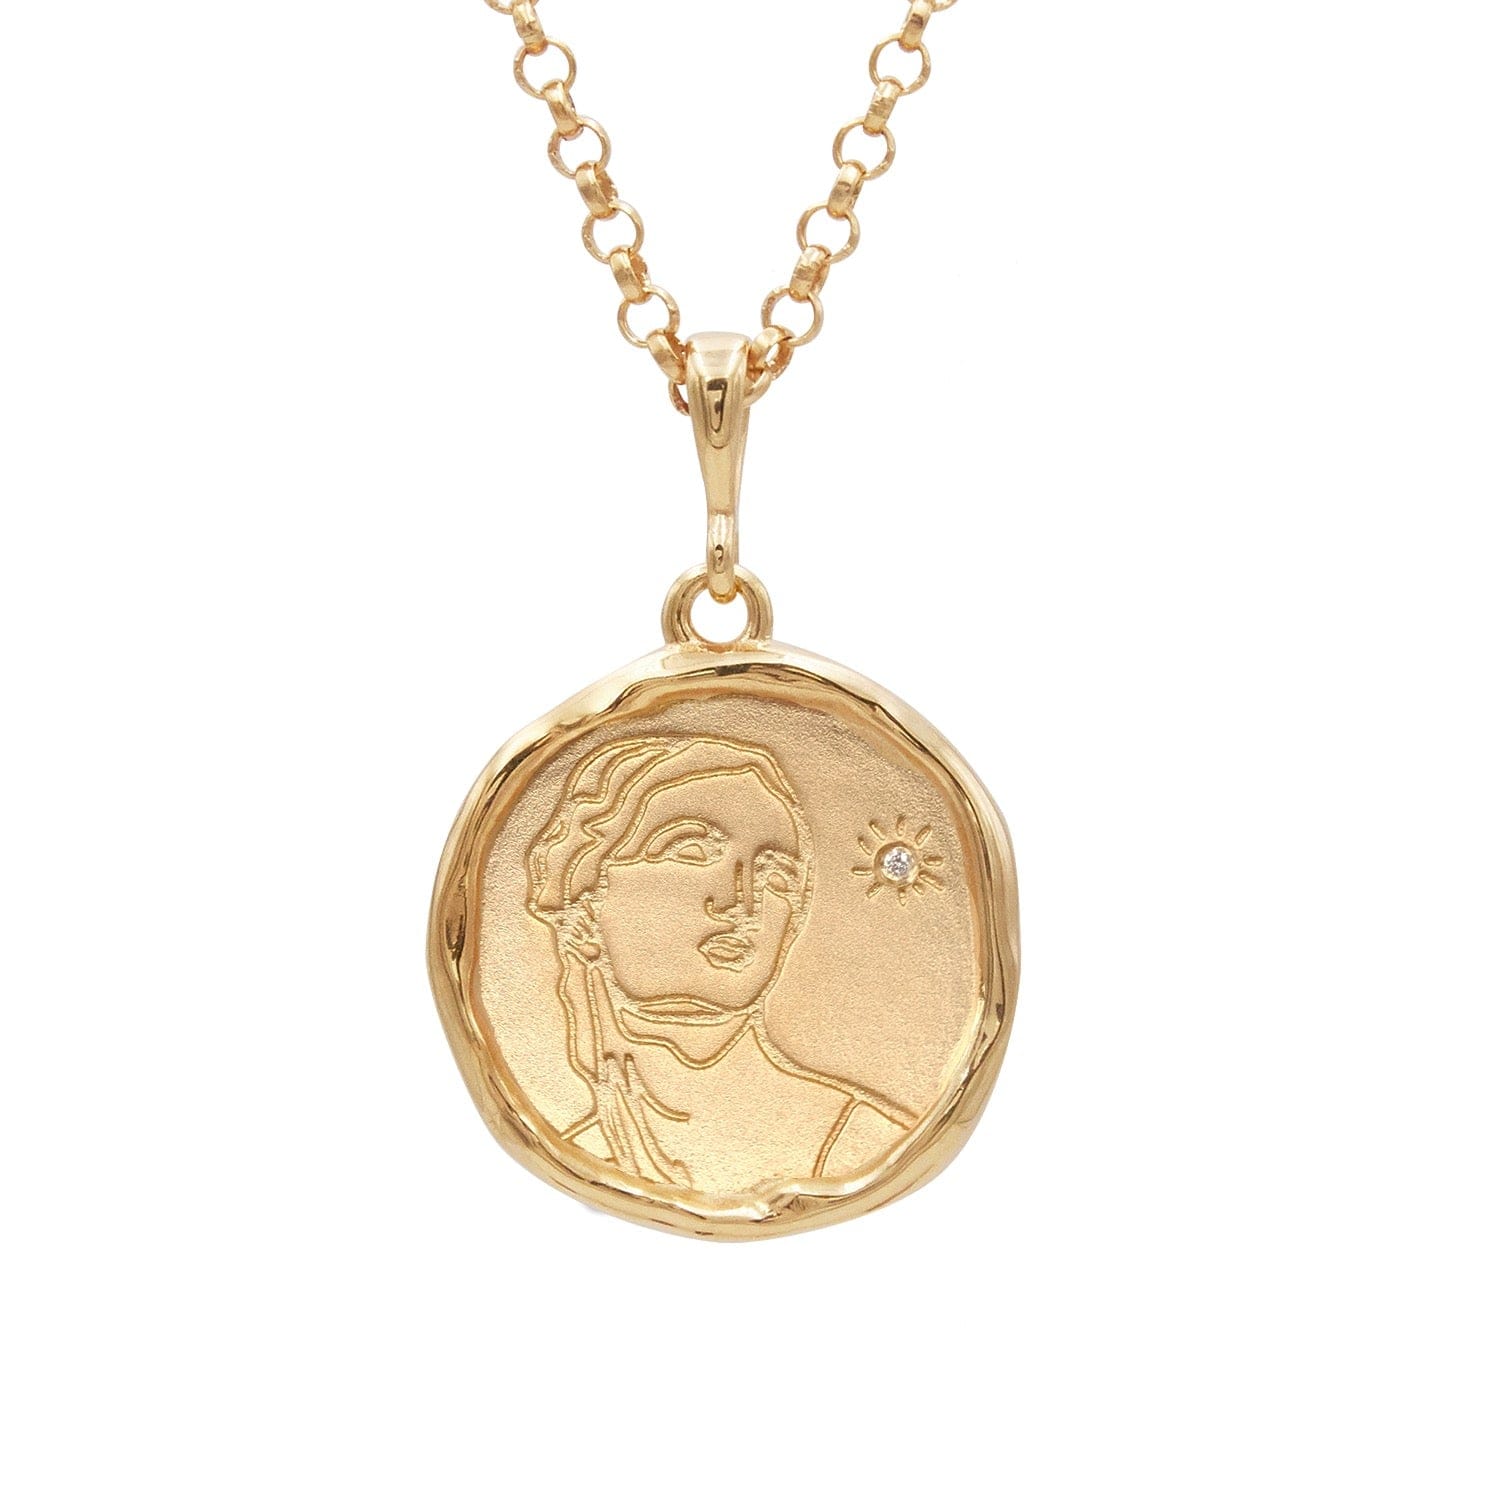 GLDS 1 of 1 Pendant, 18K - The GLD Shop